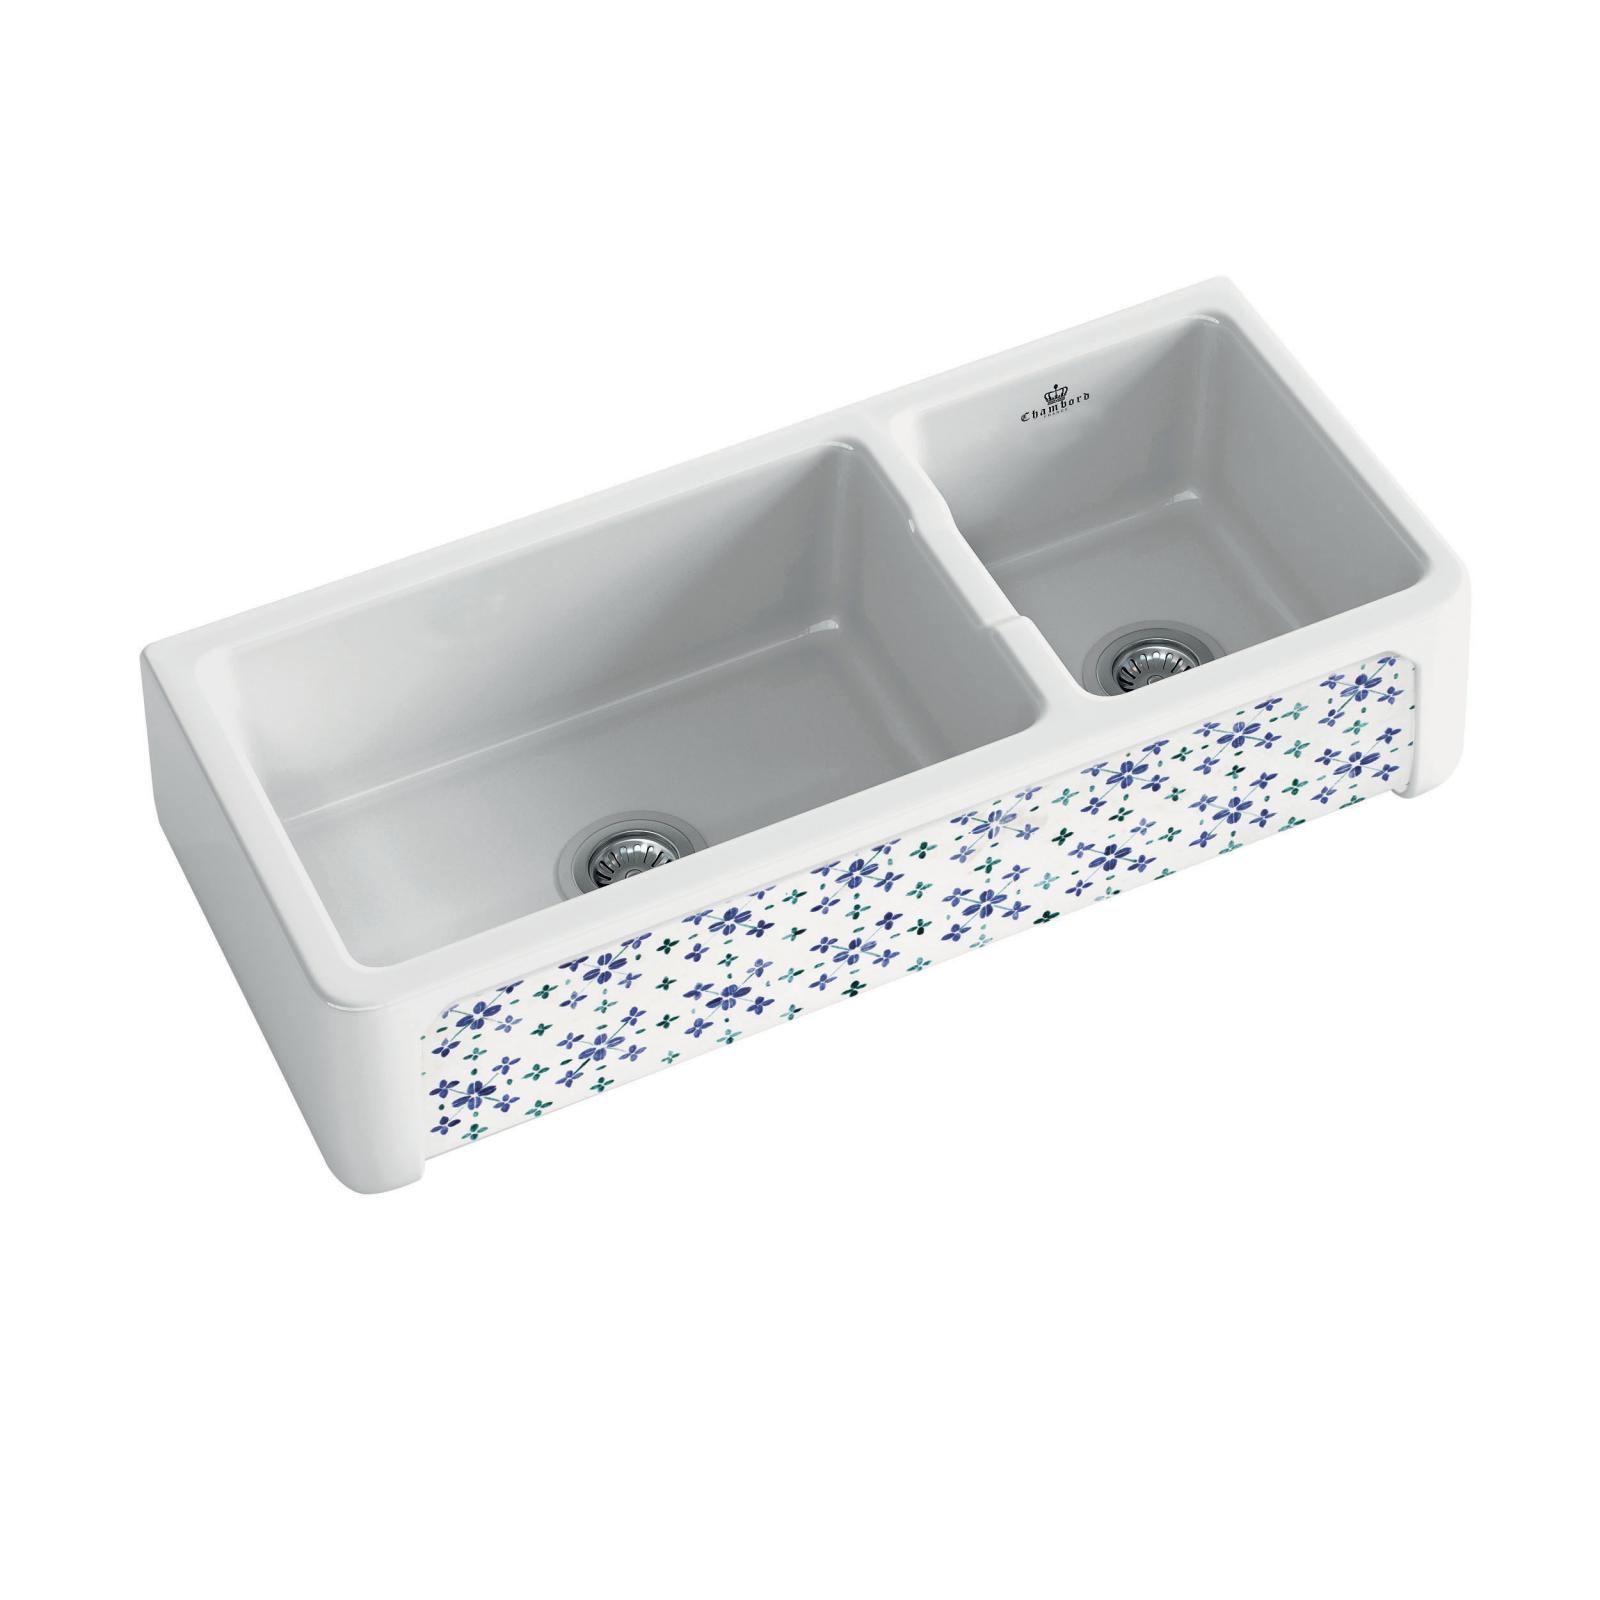 High-quality sink Henri III Bretagne - one and a half bowl, decorated ceramic ambience 1